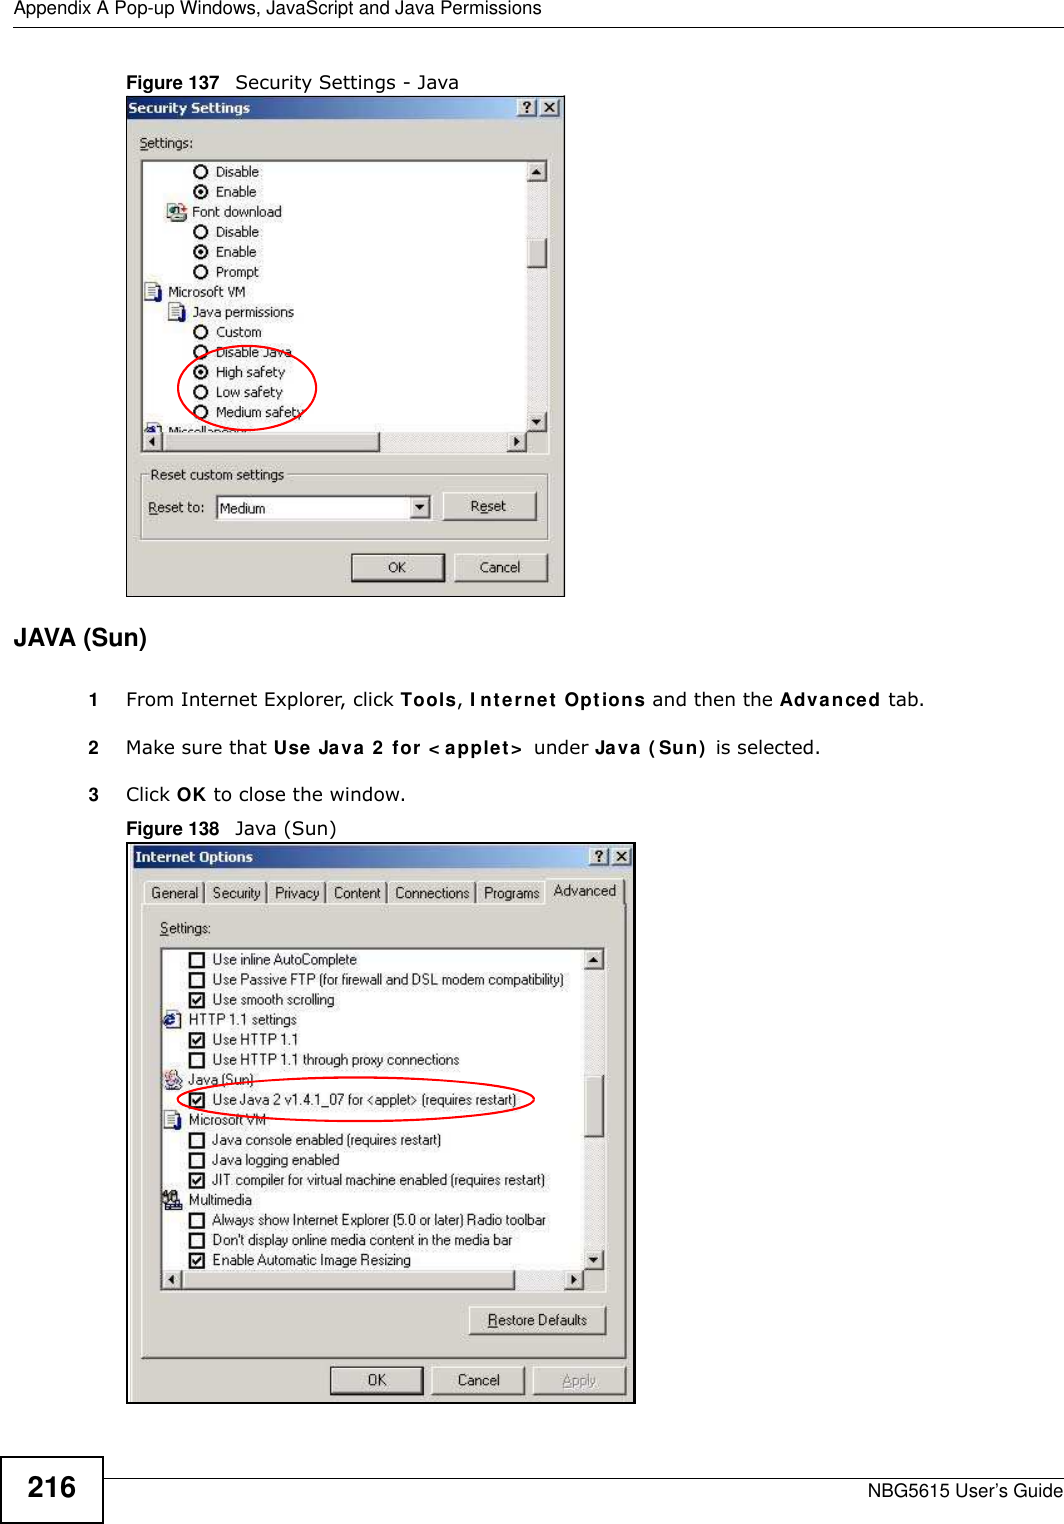 Appendix A Pop-up Windows, JavaScript and Java PermissionsNBG5615 User’s Guide216Figure 137   Security Settings - Java JAVA (Sun)1From Internet Explorer, click Tools, I nternet Options and then the Advanced tab. 2Make sure that Use Java 2  for &lt; applet&gt;  under Java ( Sun)  is selected.3Click OK to close the window.Figure 138   Java (Sun)